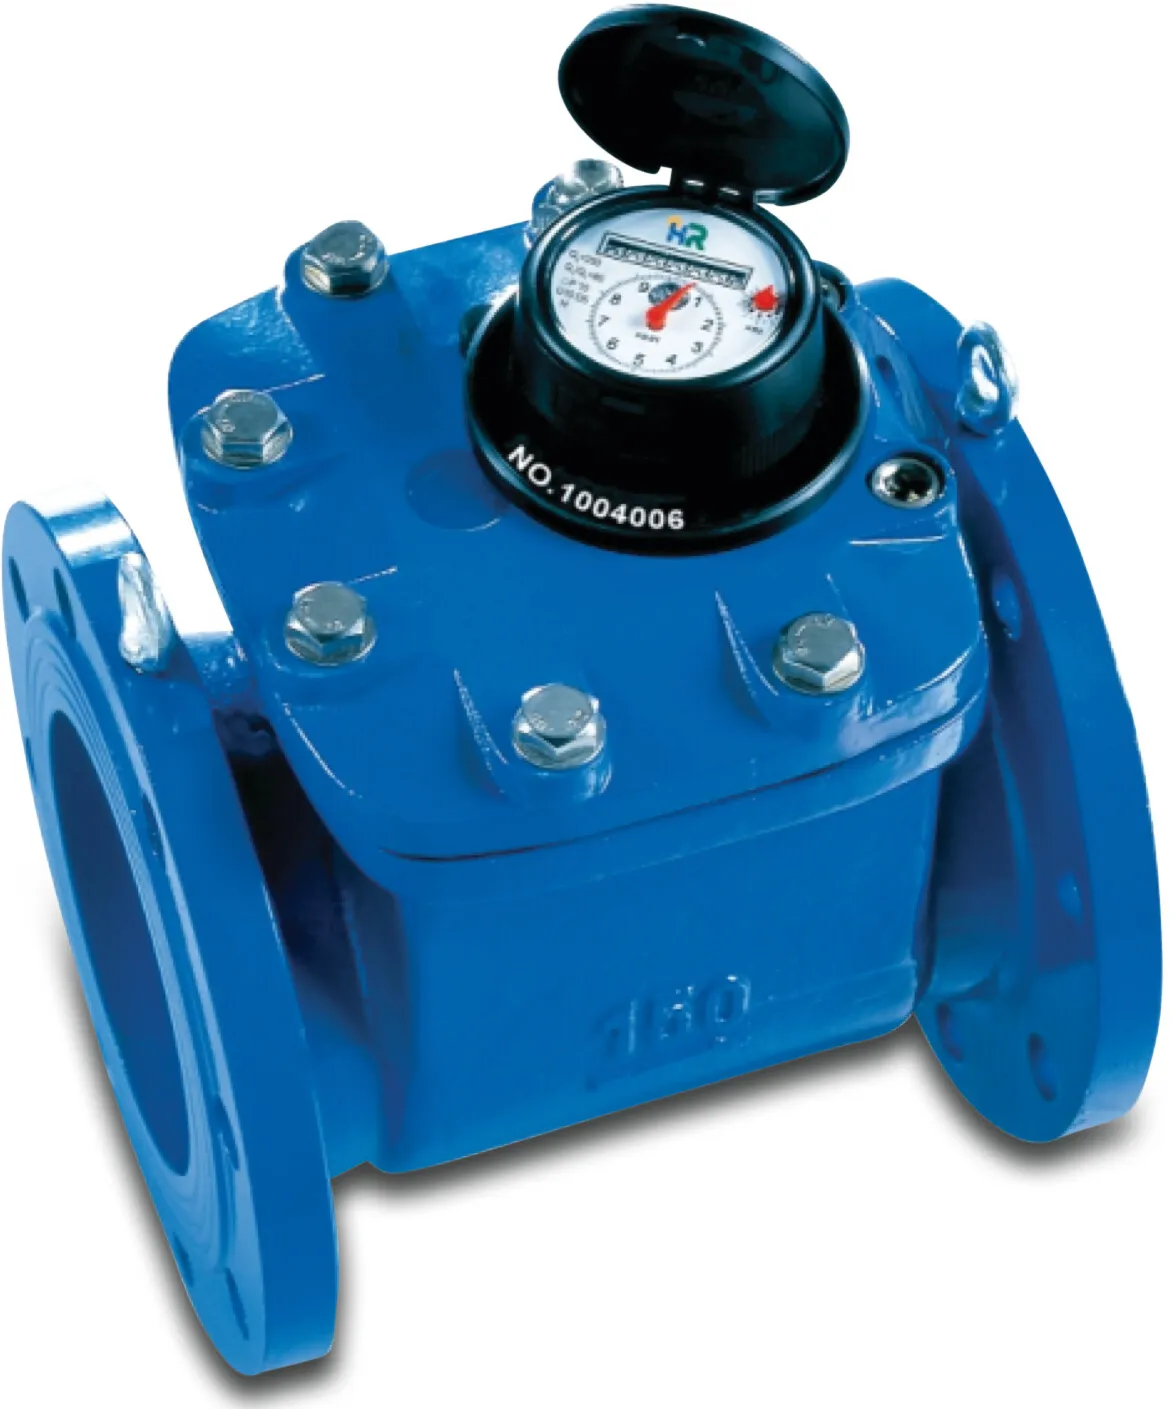 Azud Water meter brass DN50 flange 40m³/h blue type Woltman horizontal with pulse option